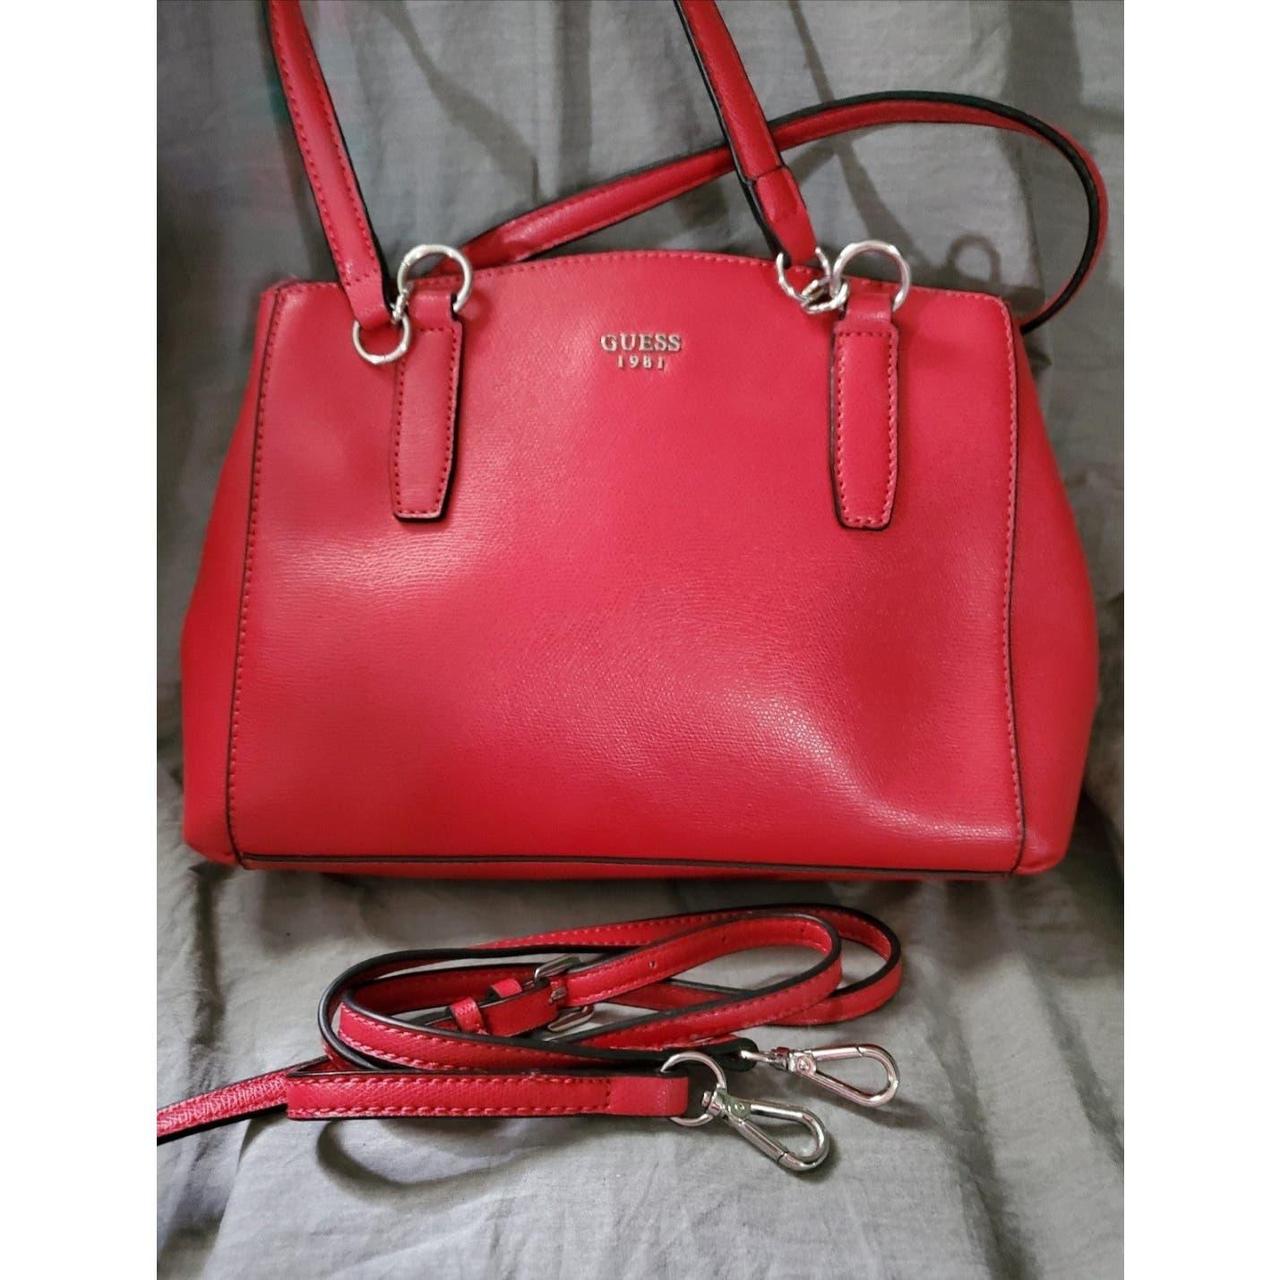 Guess Studded Leather Red Handbag. Sport Bag. Guess - Etsy